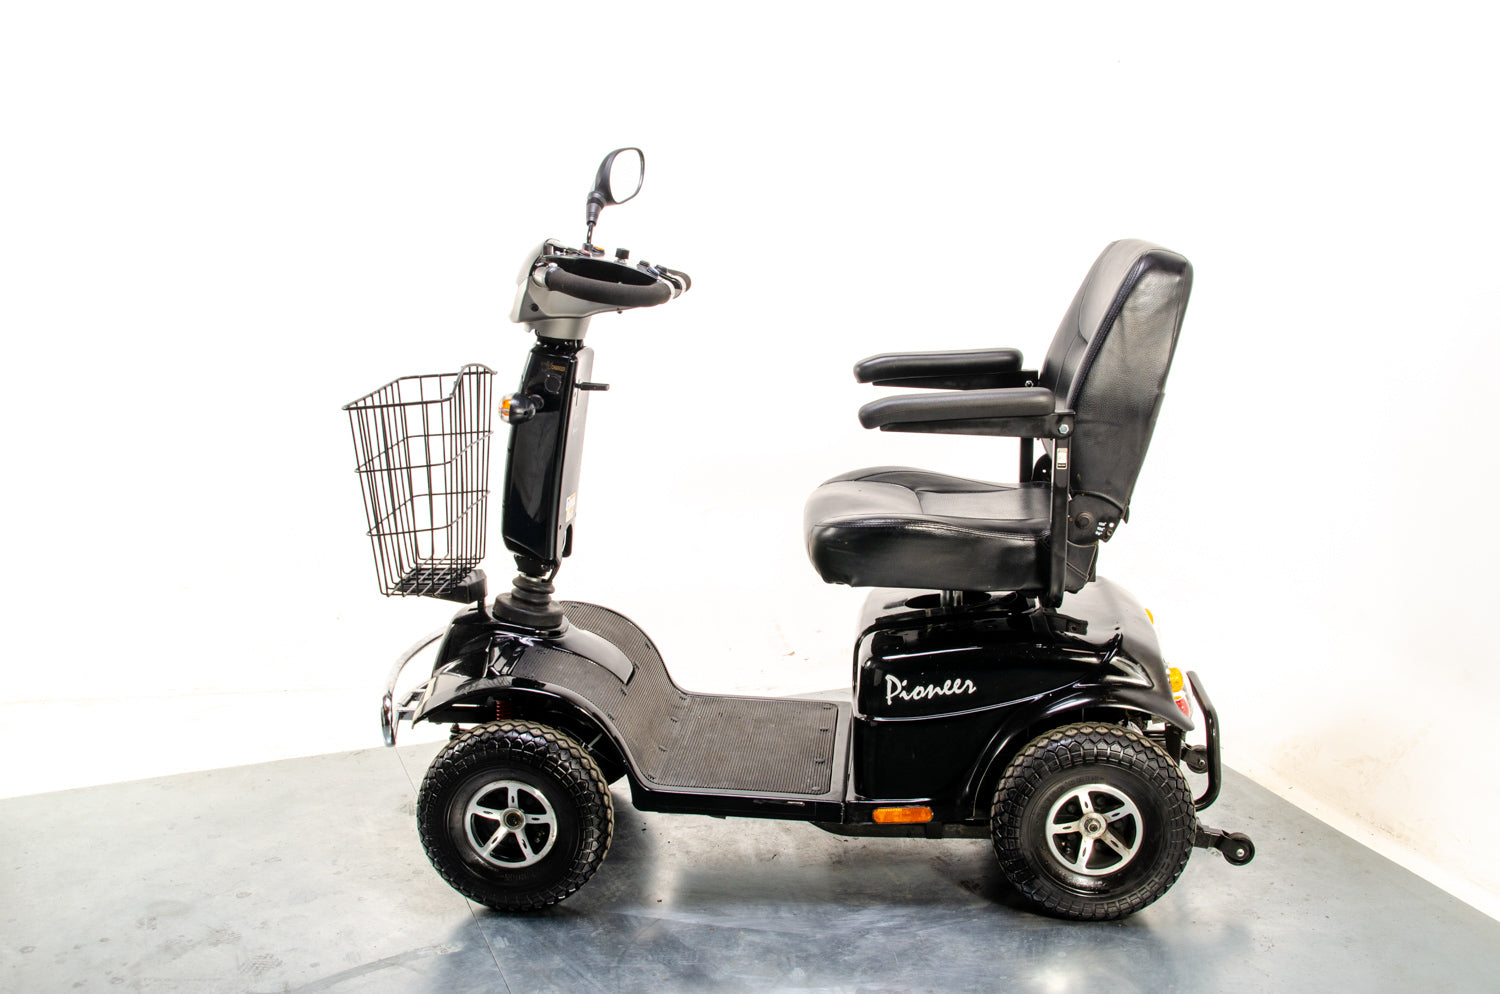 Rascal Pioneer Used Electric Mobility Scooter 8mph All-Terrain Suspension Off-Road Black 13408